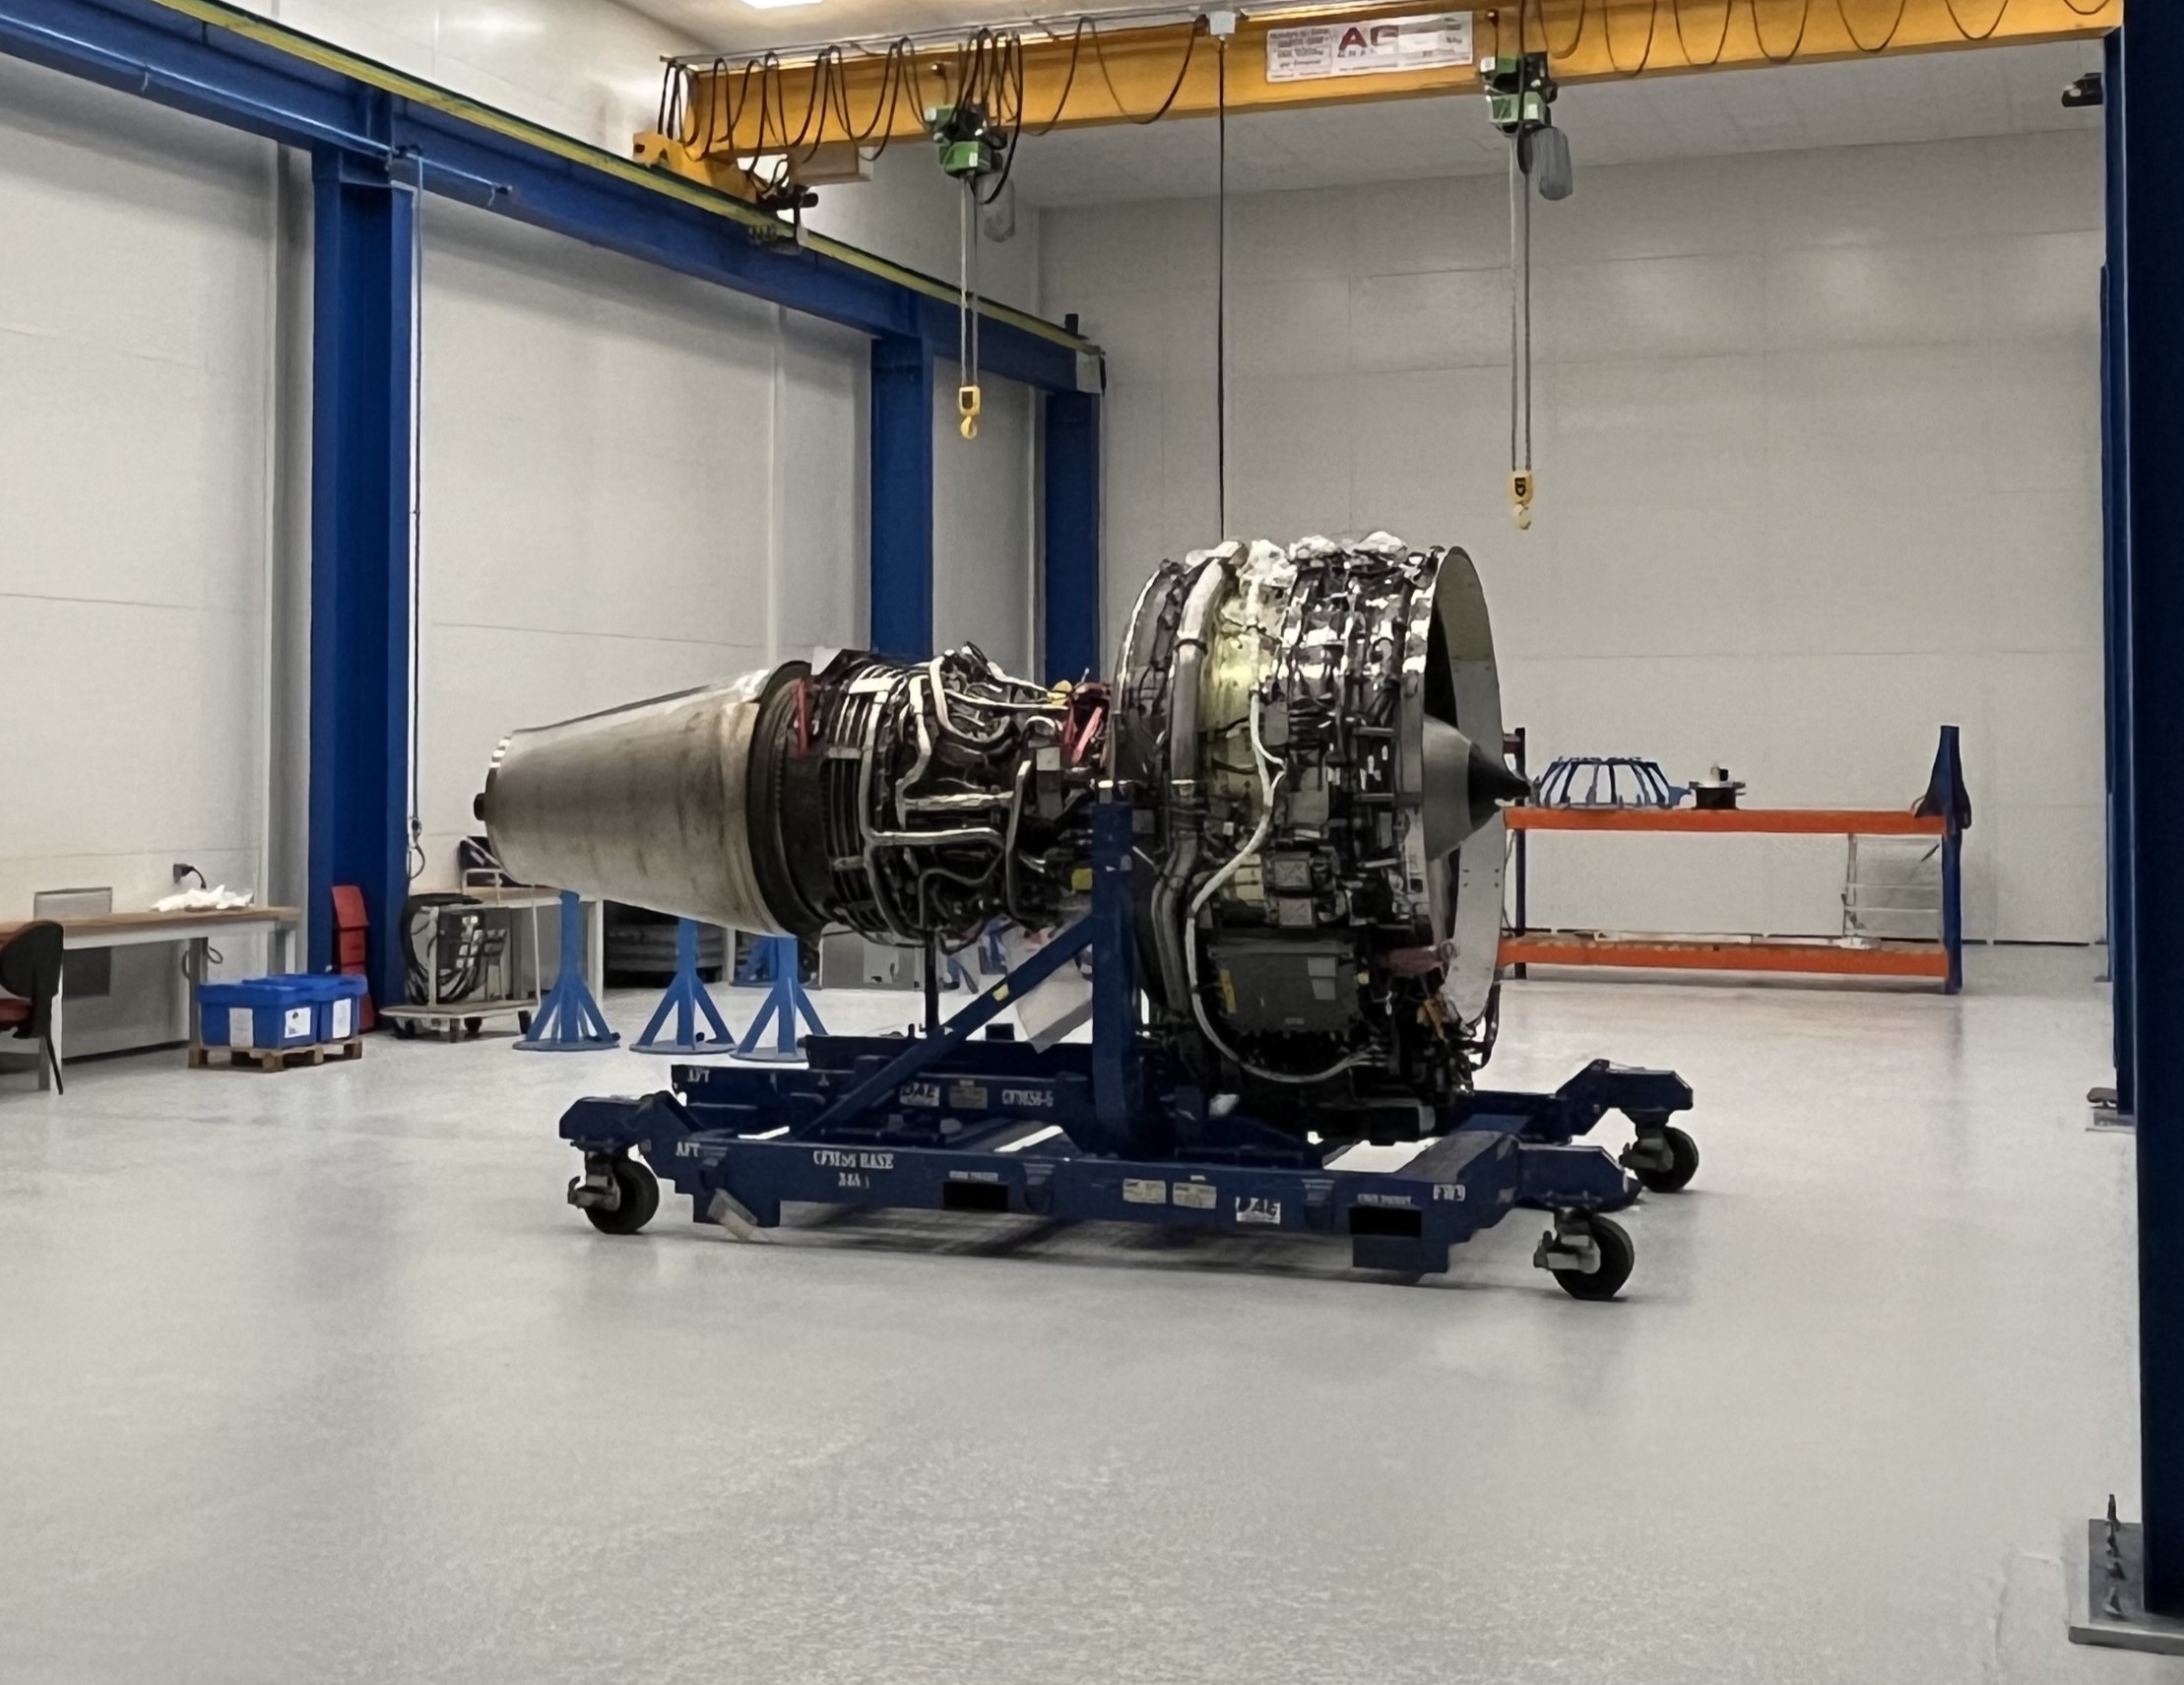 Vallair completes sale of CFM56-5B engine